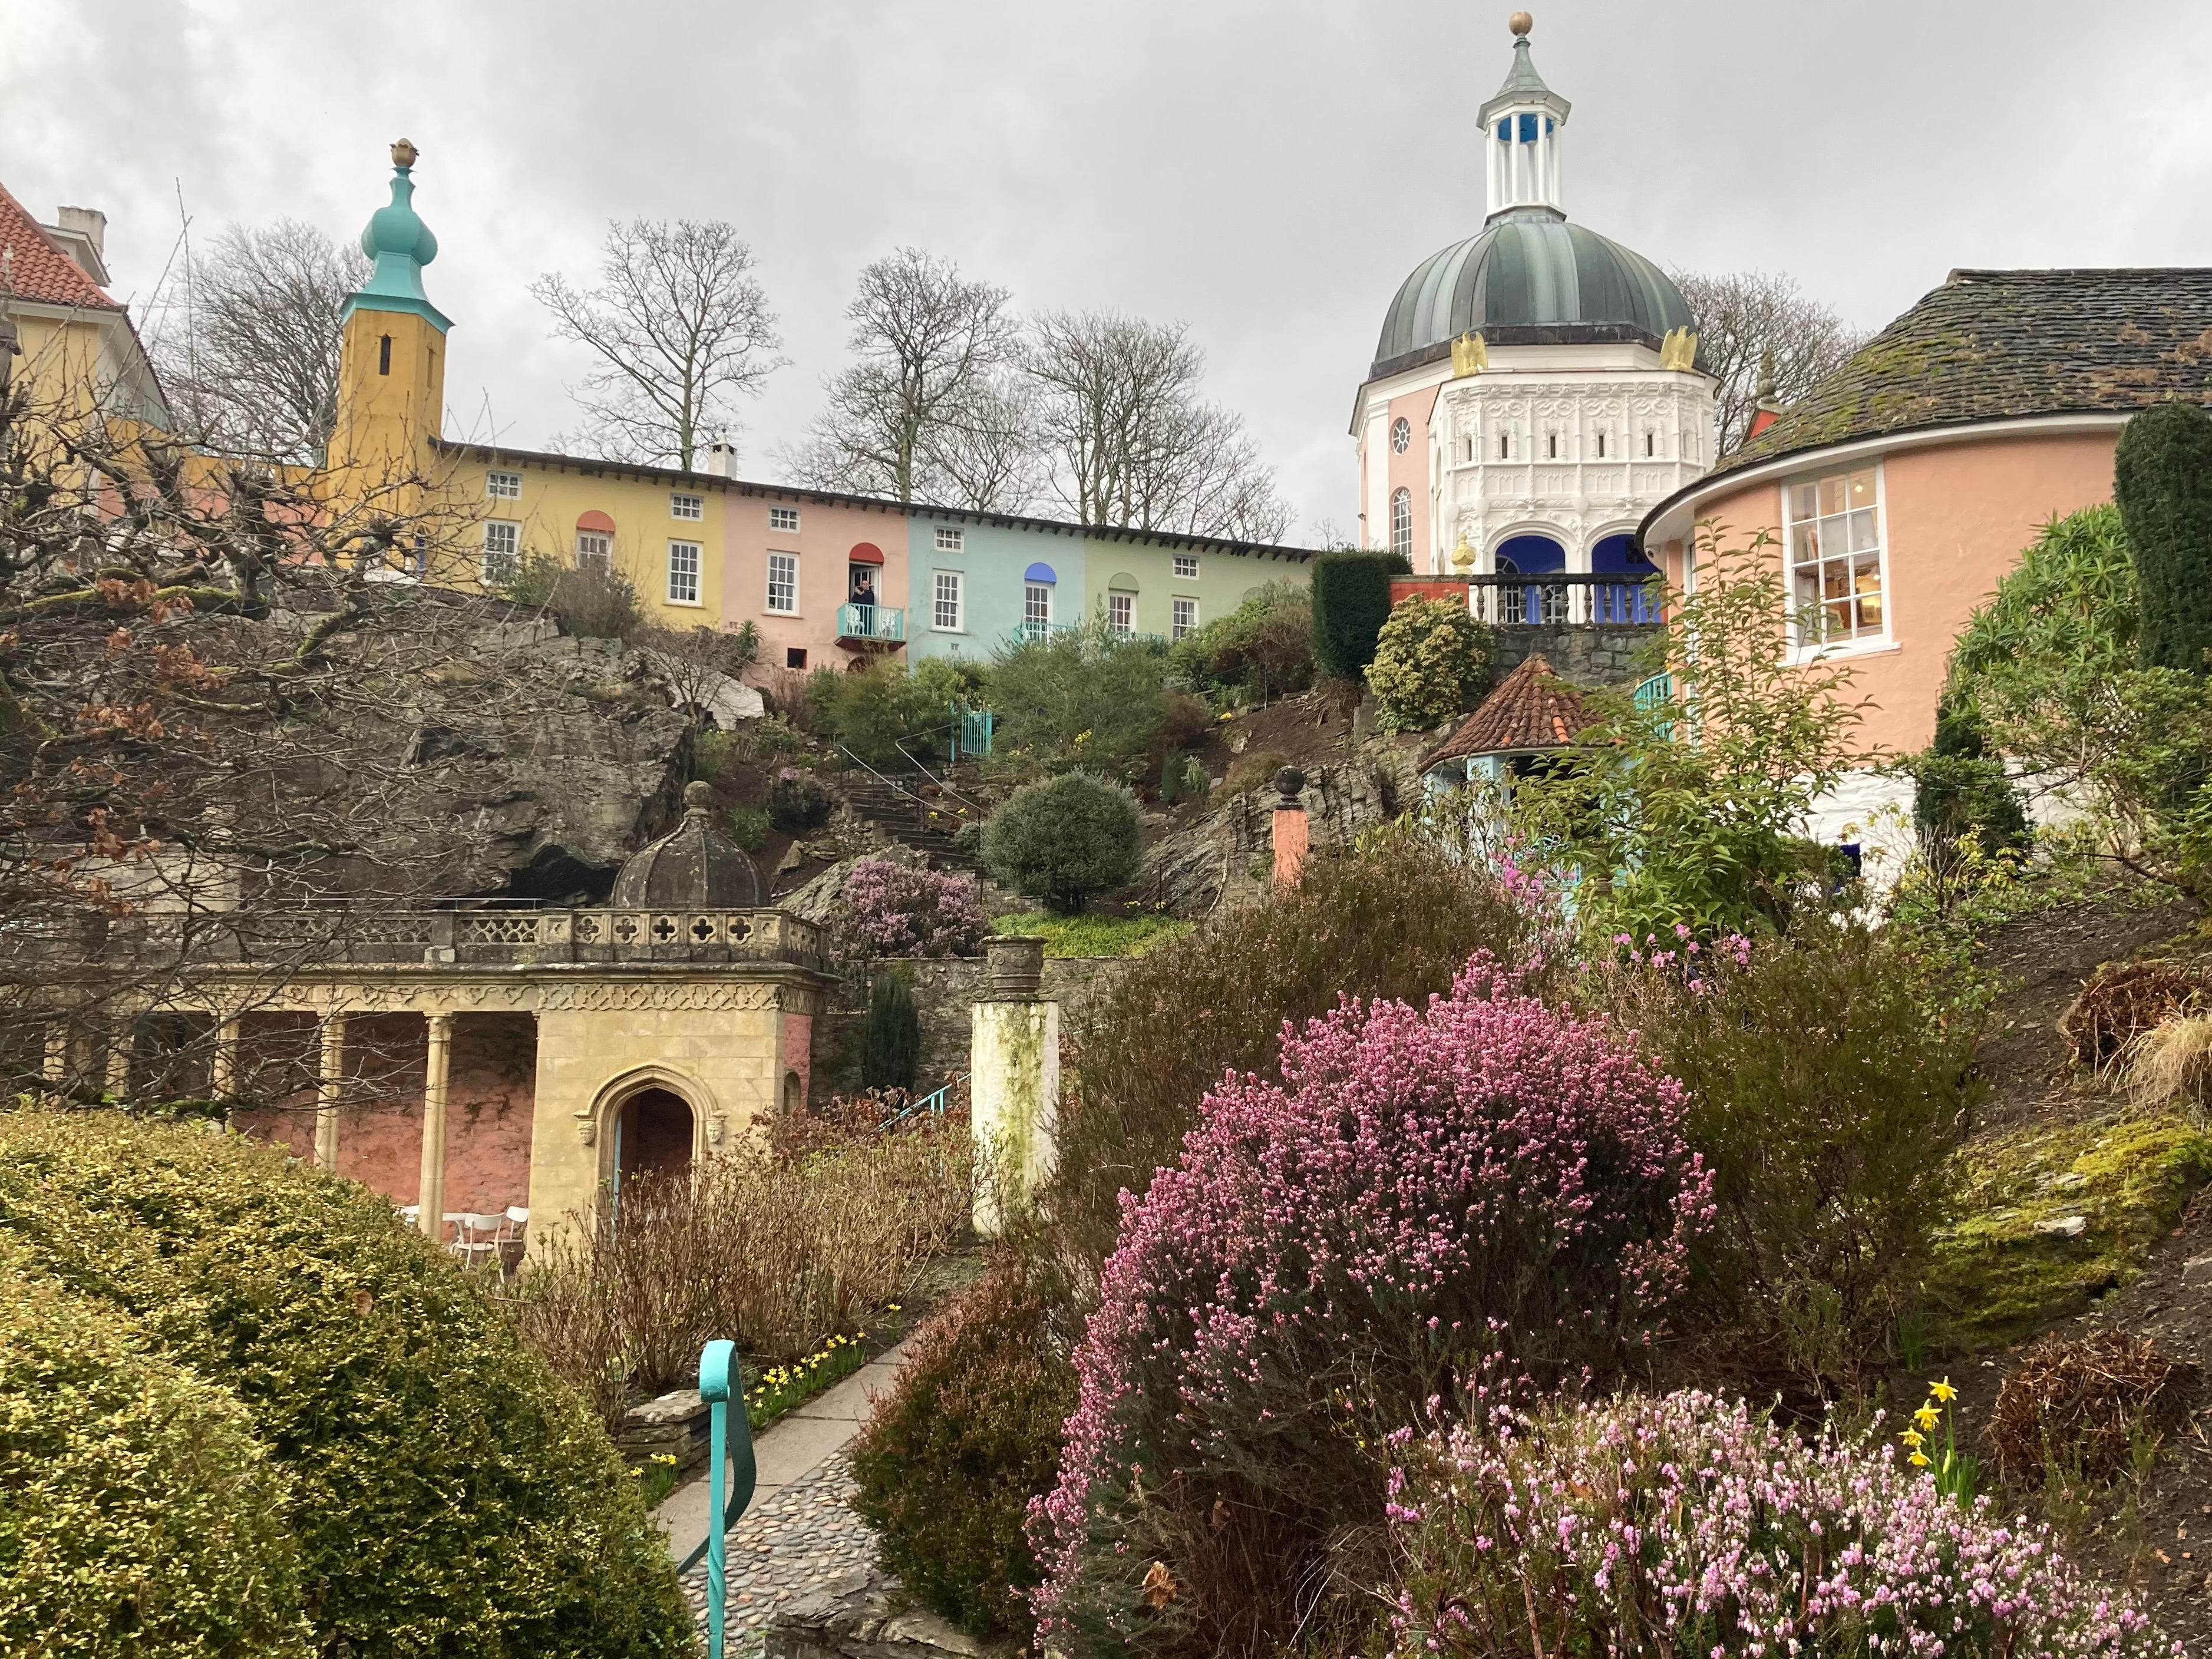 Portmeirion: Wales’s answer to Italy